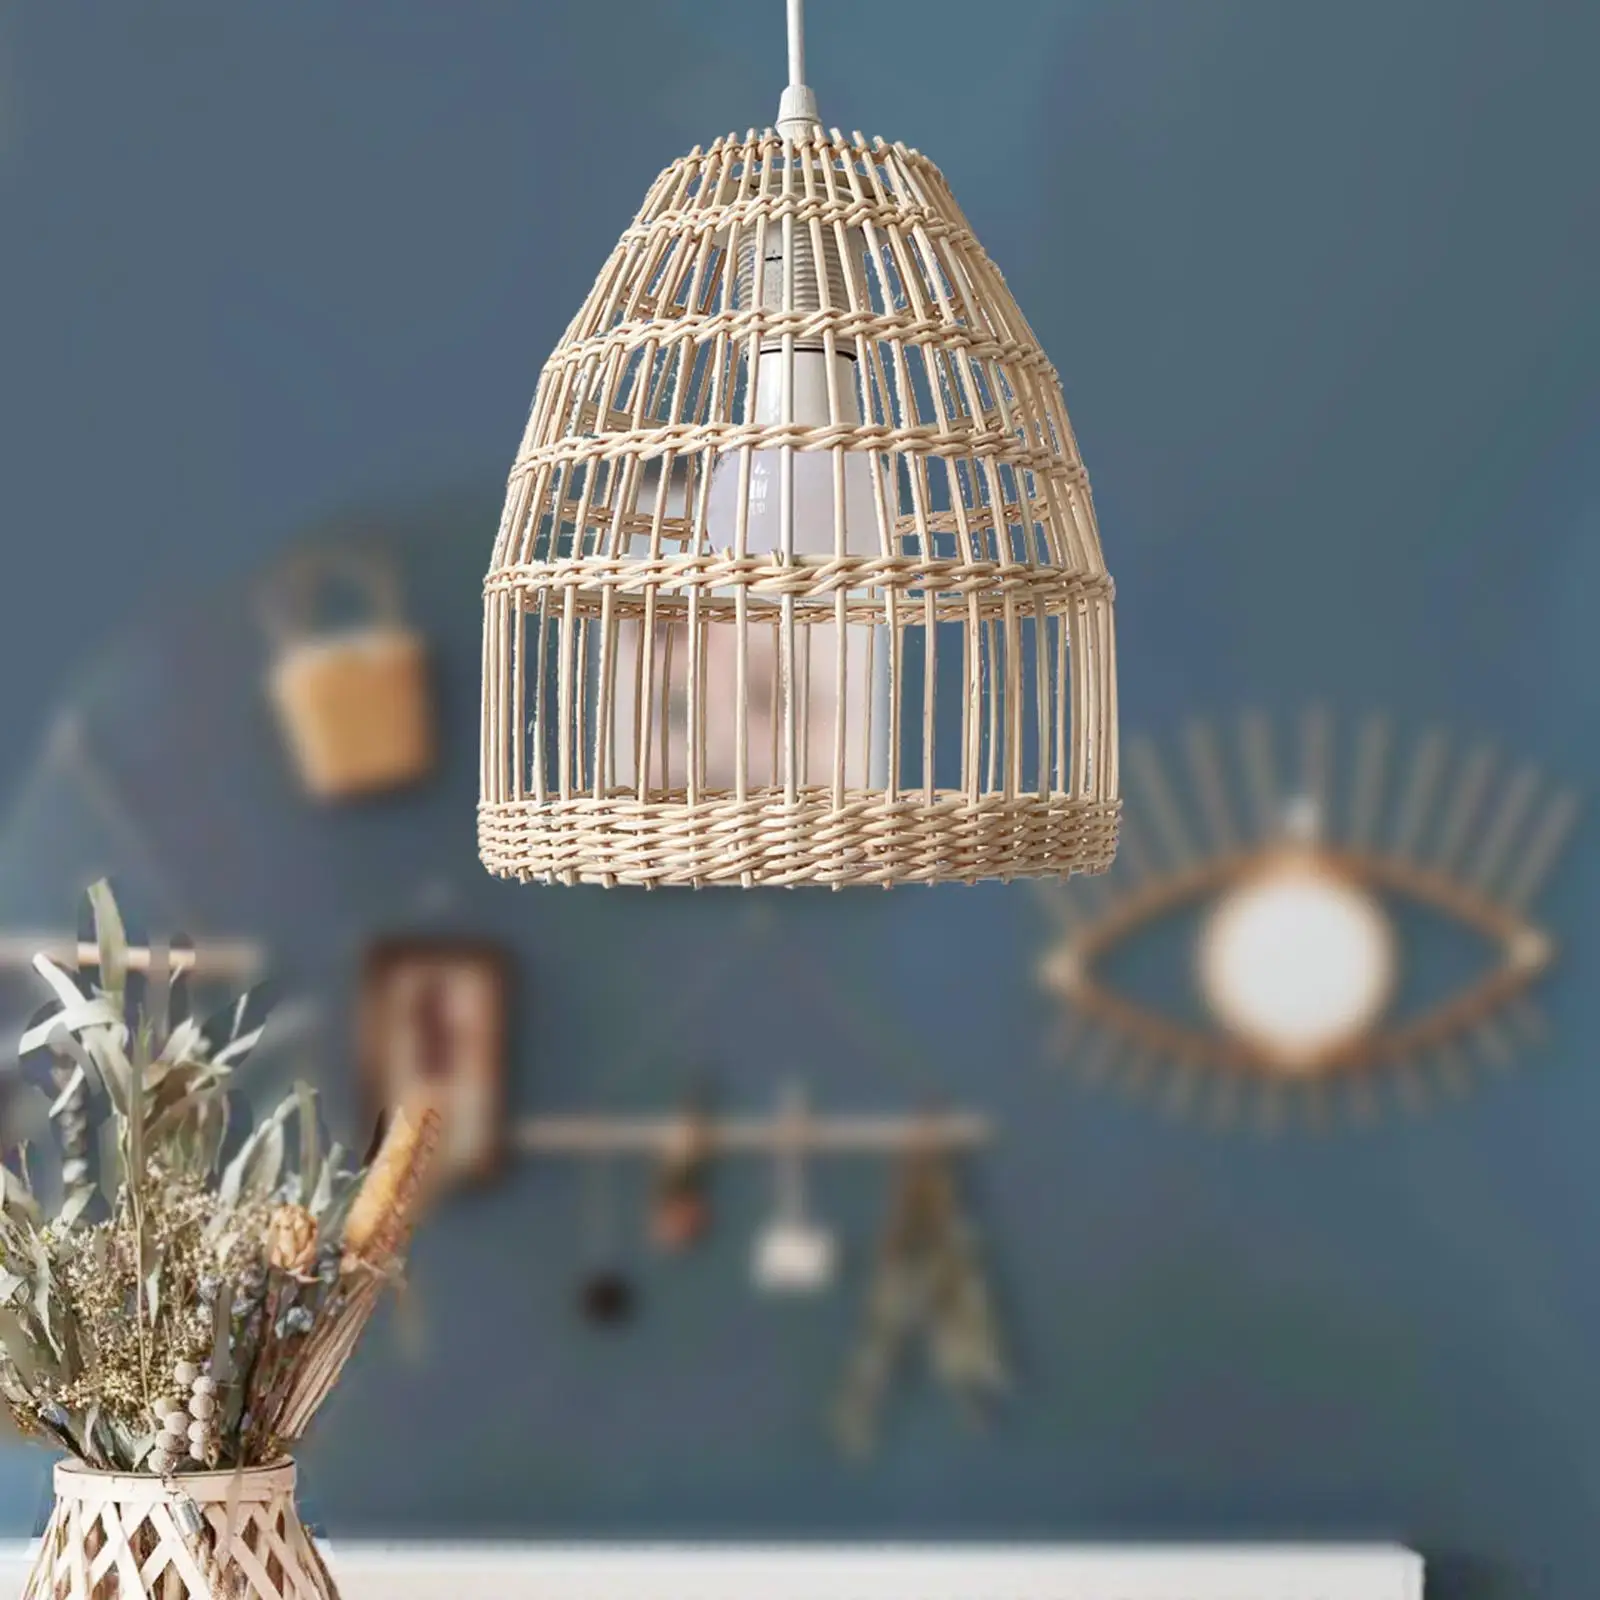 Rattan Lampshade Hanging Natural Ceiling Pendant Light Shade for Bedroom